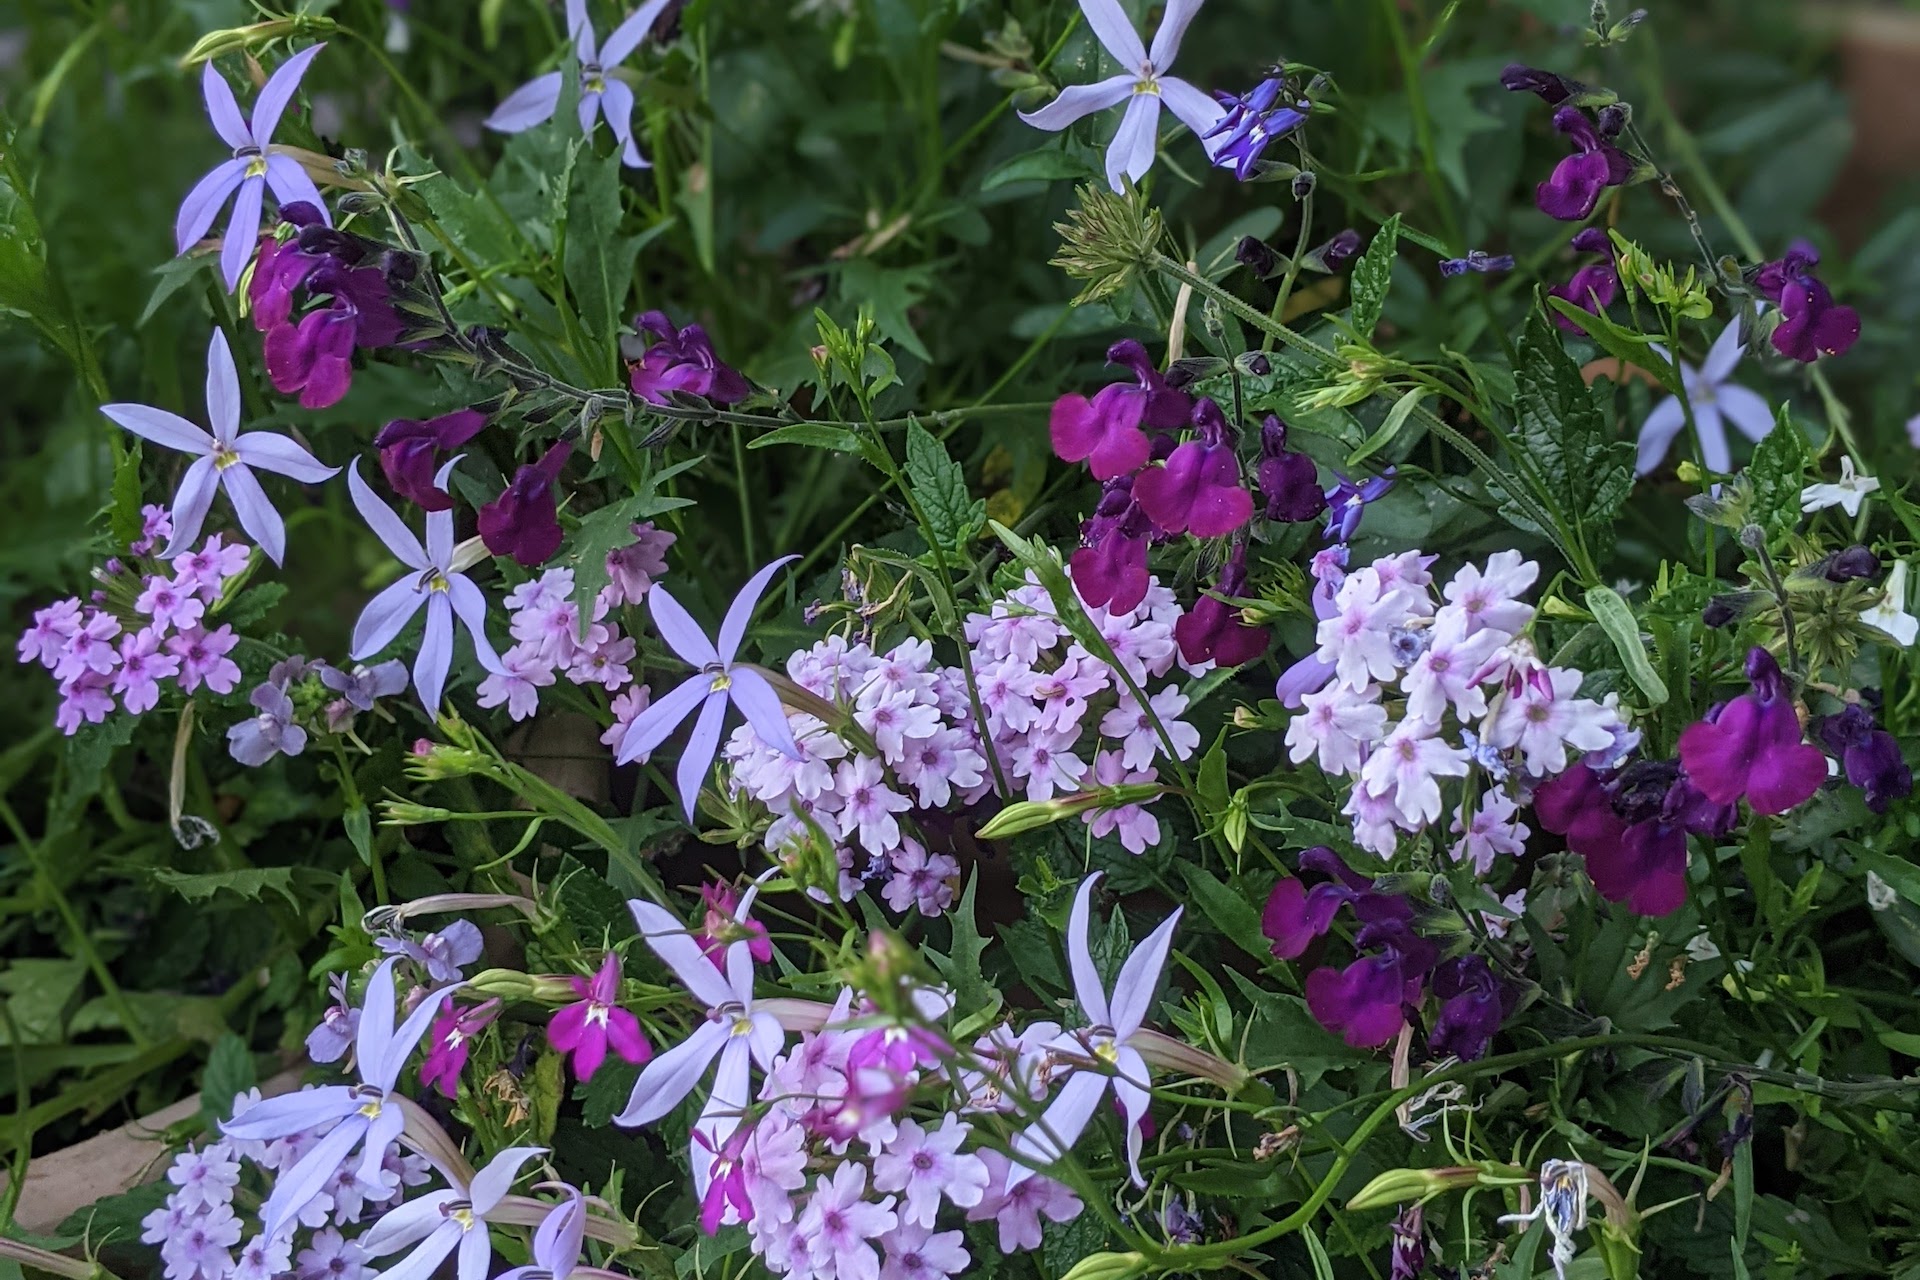 Planting combination - flowers in shades of purple